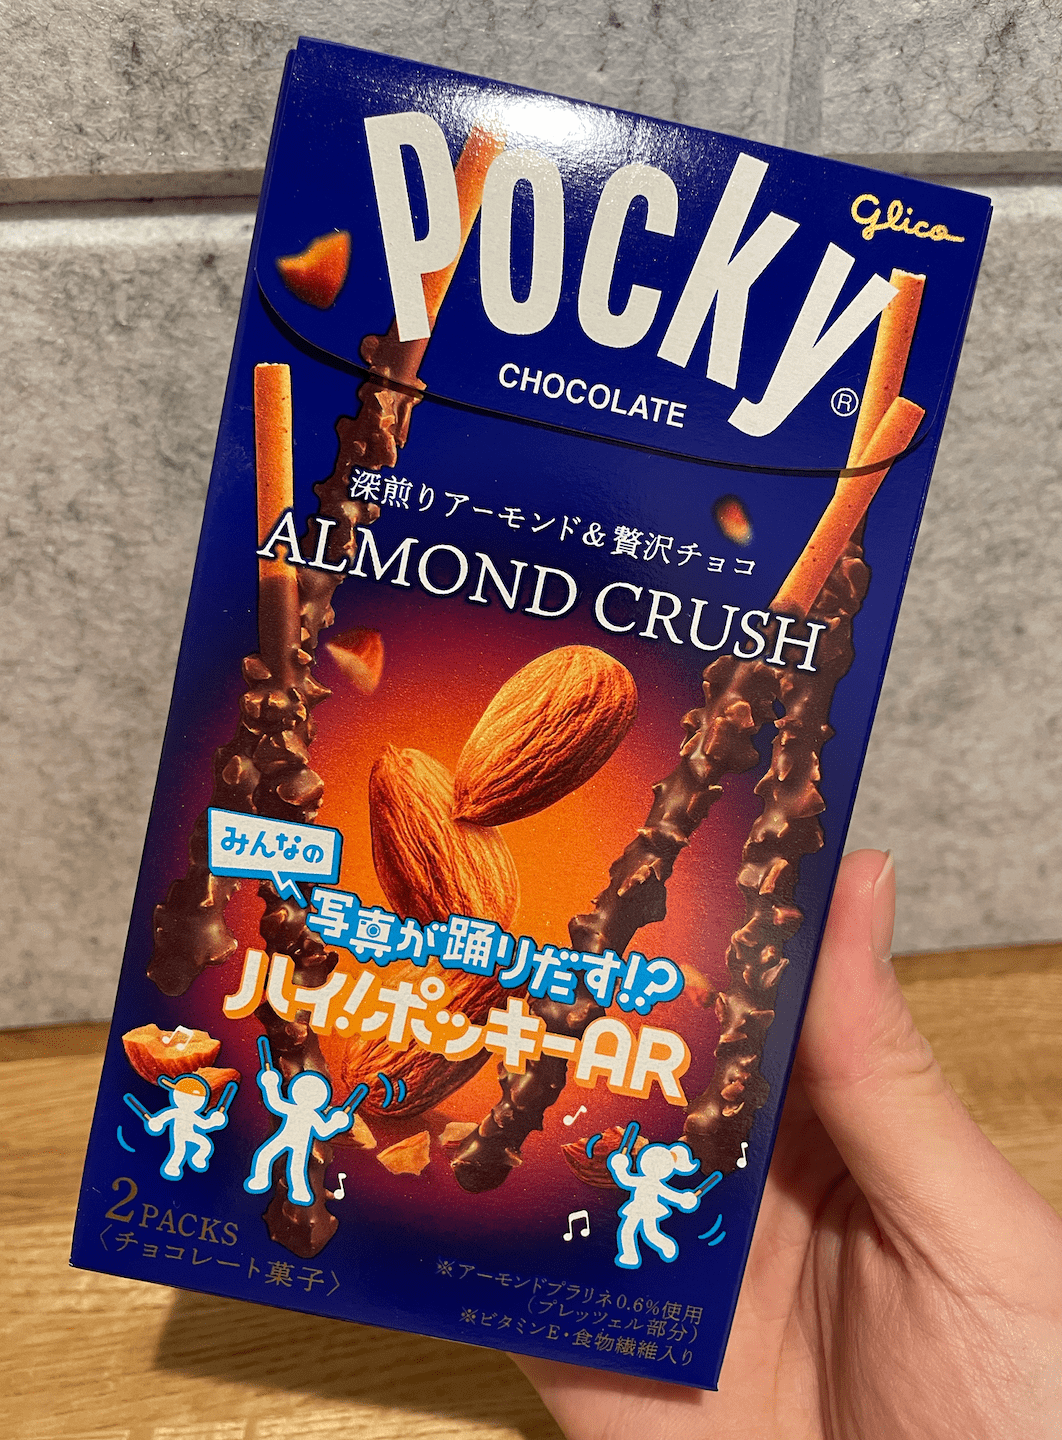 Actual product image of Pocky-Almond-Crushed 1